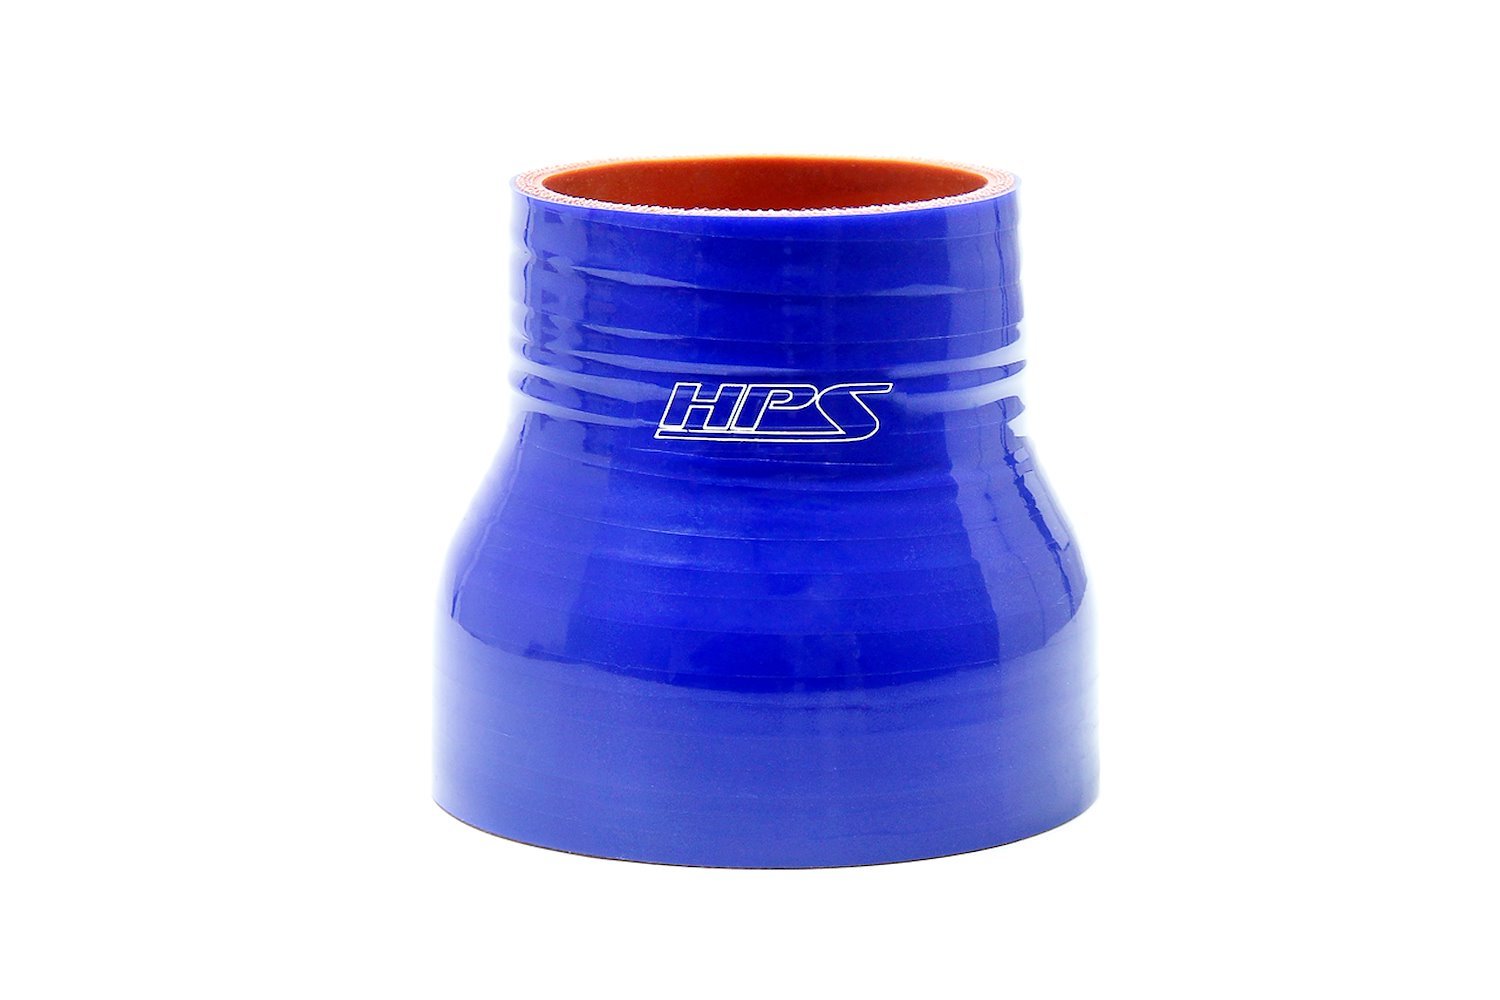 HTSR-250-350-BLUE Silicone Reducer Hose, High-Temp 4-Ply Reinforced, 2-1/2 in. - 3-1/2 in. ID, 3 in. Long, Blue